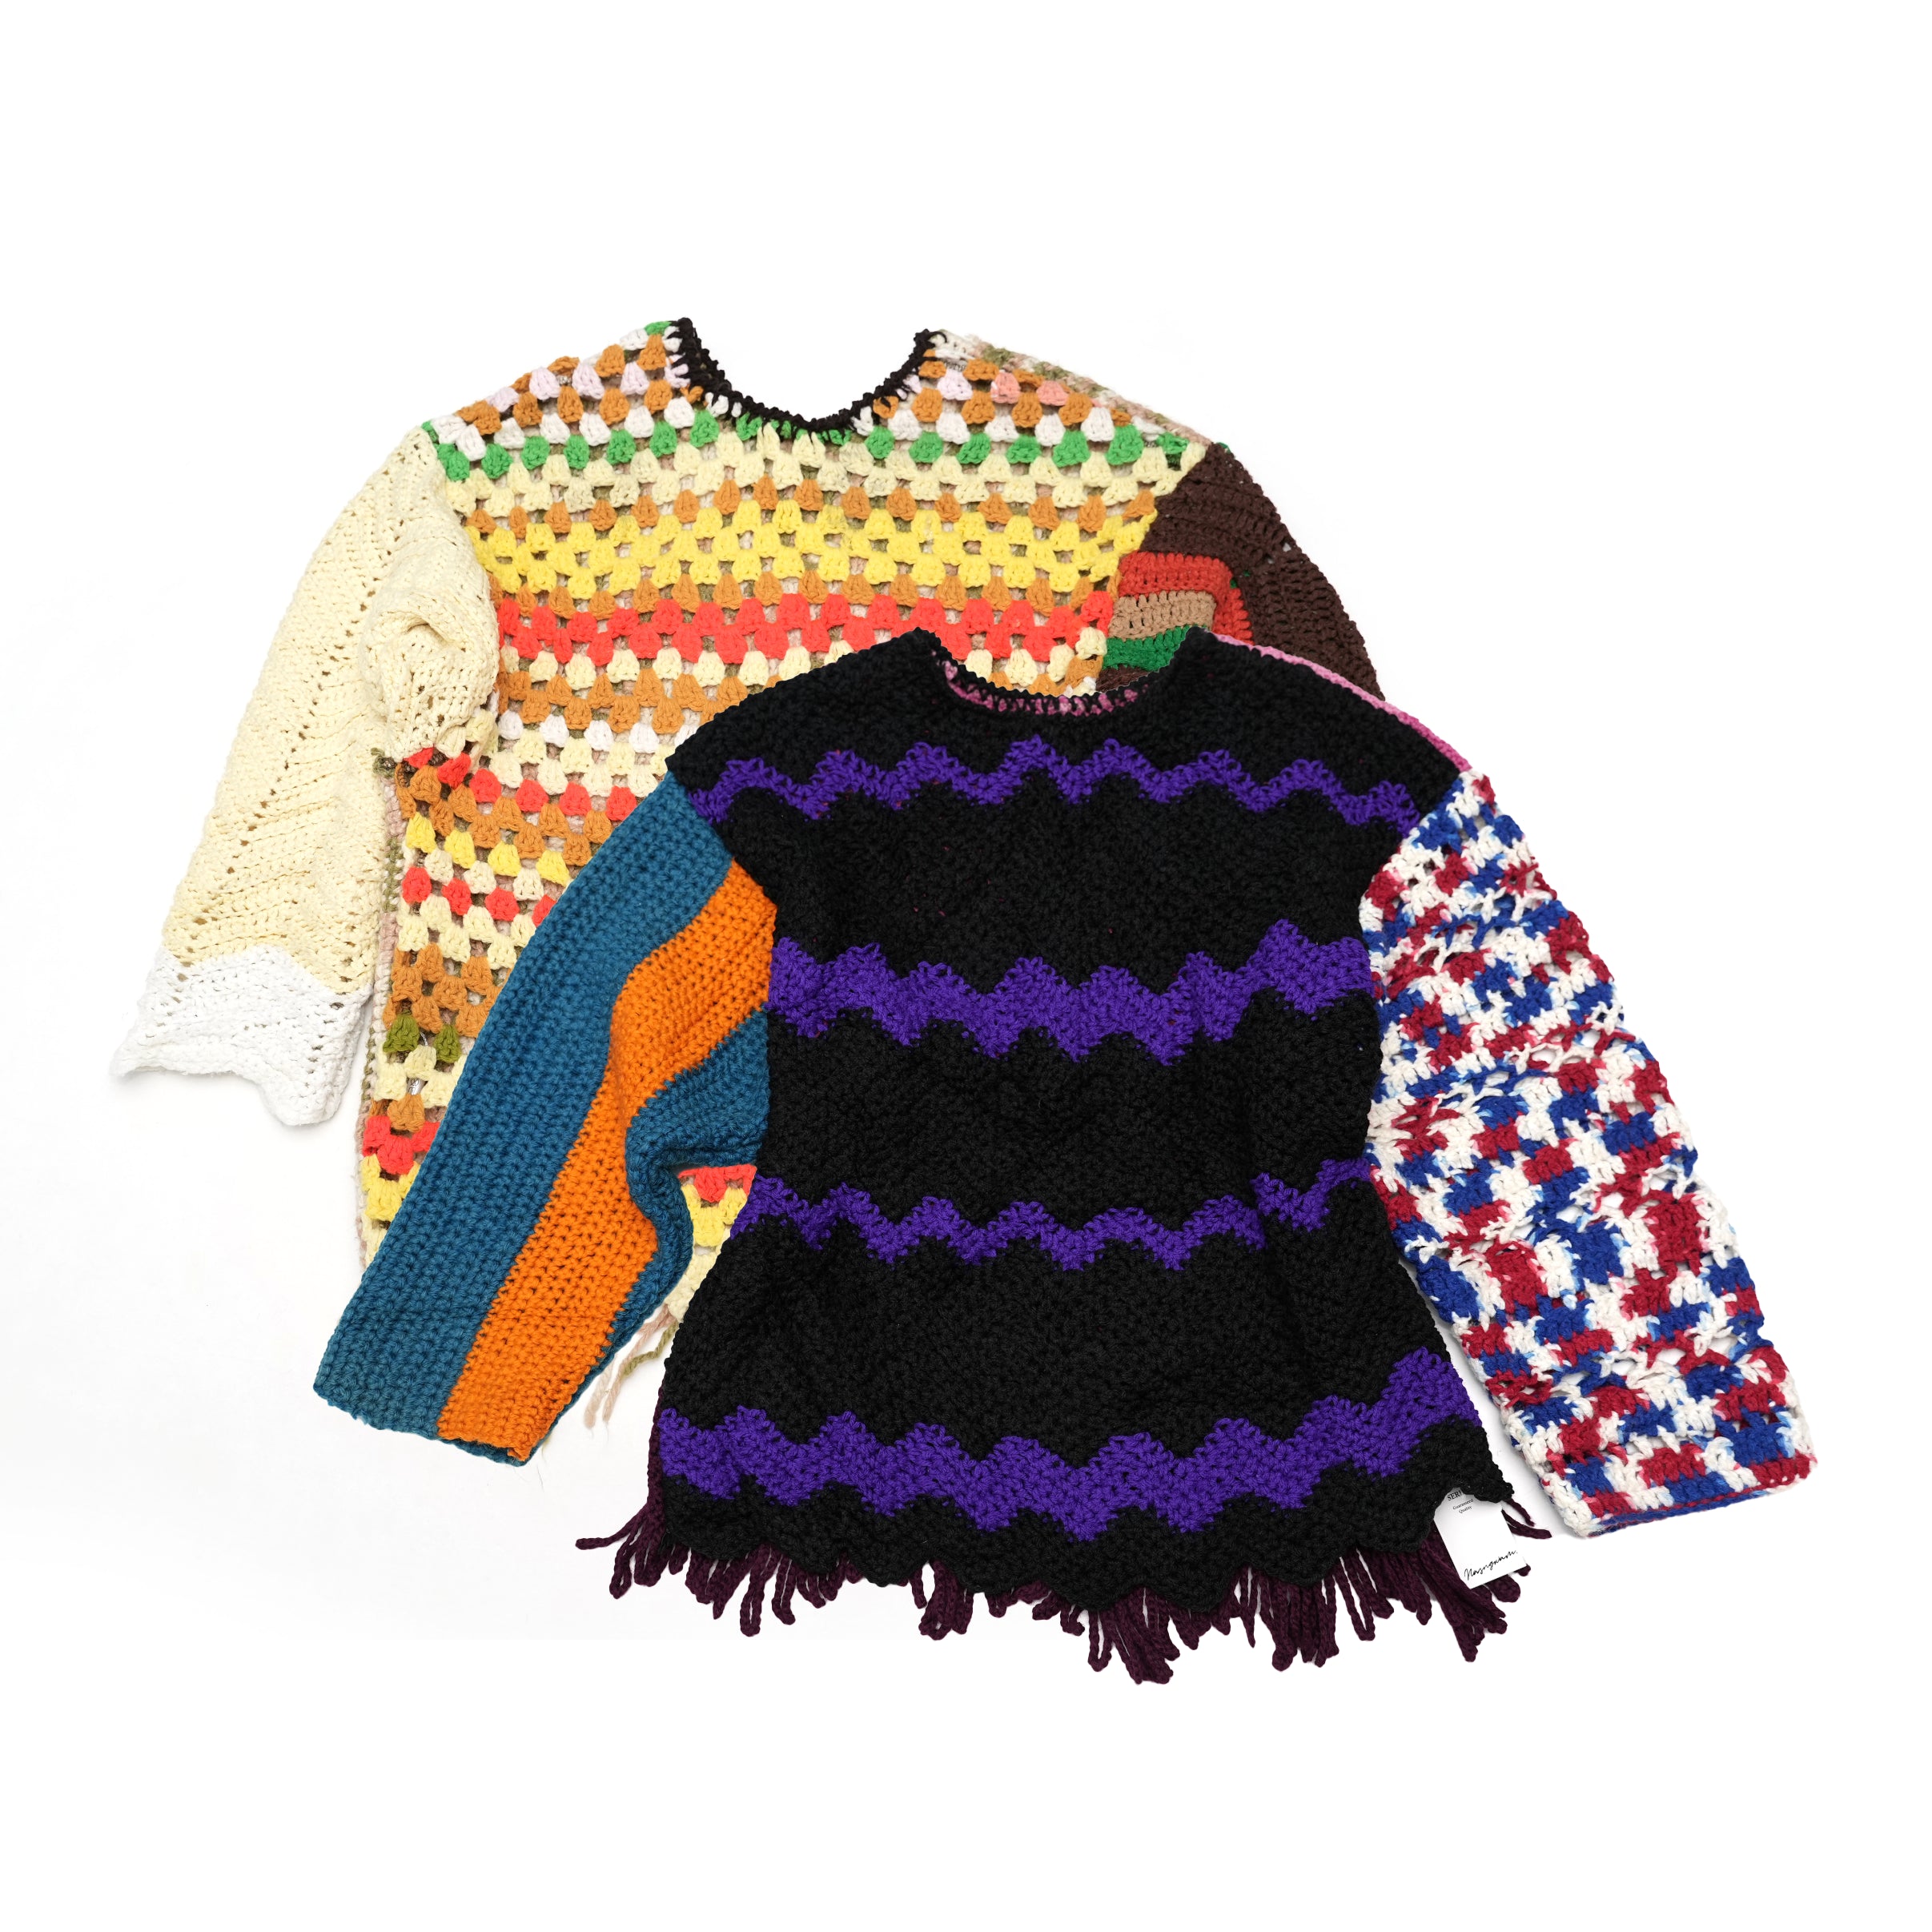 No:RK0437204 | Name:ASHBURY CREW KNIT | Color:Multi_A/Multi_B | Size:Free【NASNGWAM_ナスングワム】